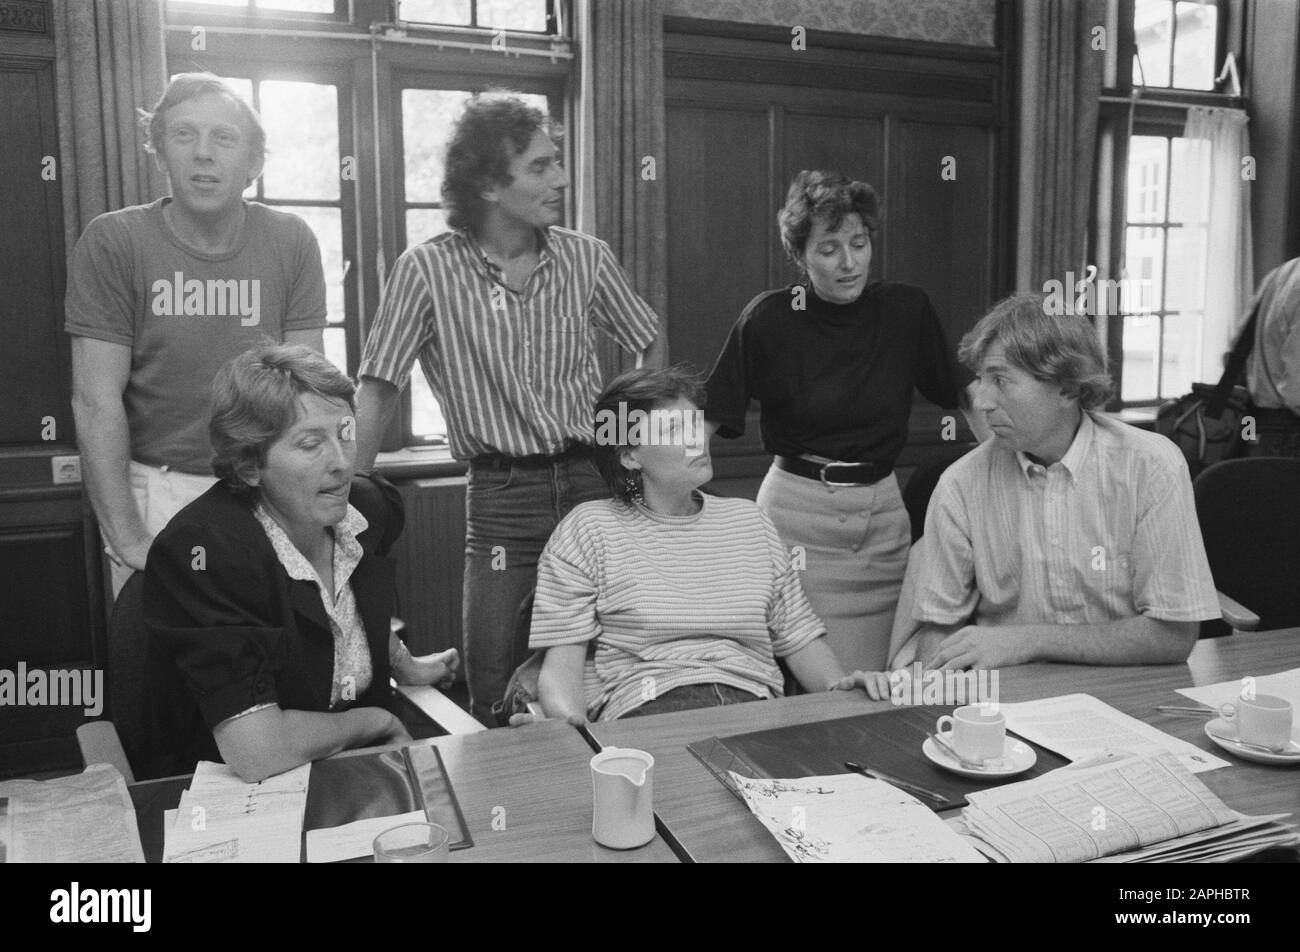 Group meetings after the parliamentary elections Description: The franction of GreenLeft Date: September 7, 1989 Keywords: political groups, meetings, elections Stock Photo